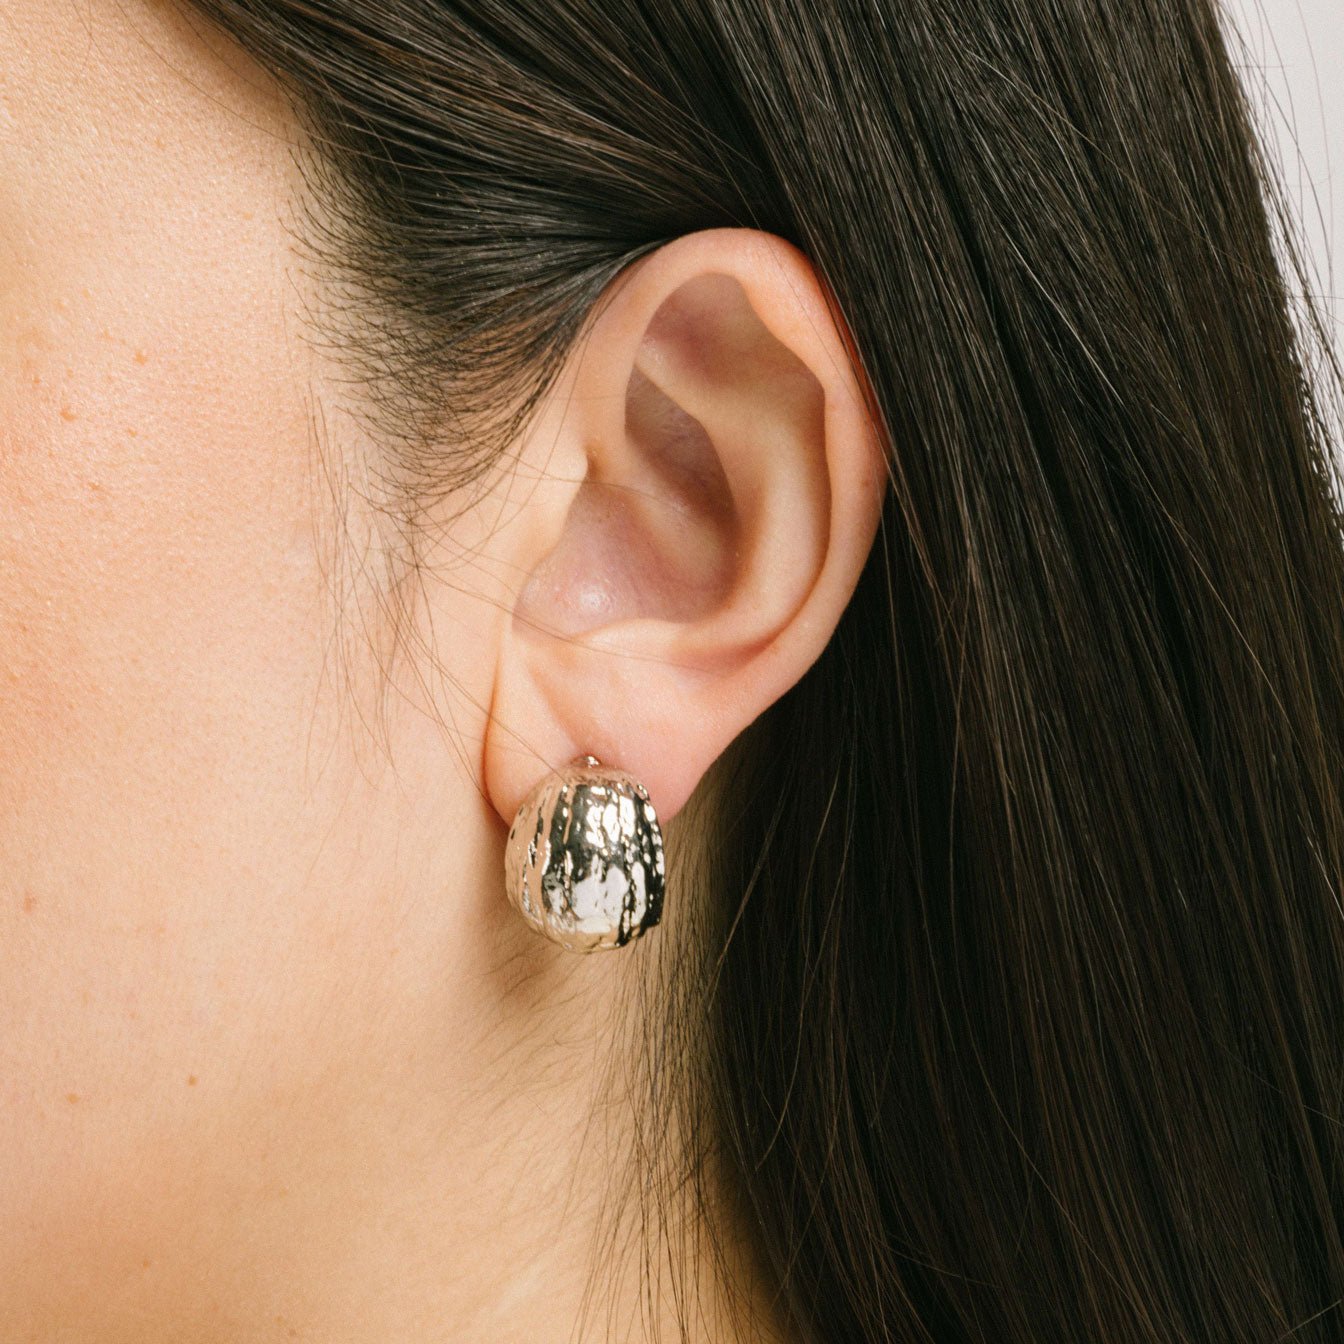 A model wearing the Alaia Clip On Earrings in Silver feature a padded clip-on closure, offering secure hold and ideal comfort for 8-12 hours of wear, for ear types of all shapes and sizes. Crafted from gold tone copper alloy, these earrings feature a single pair per item.